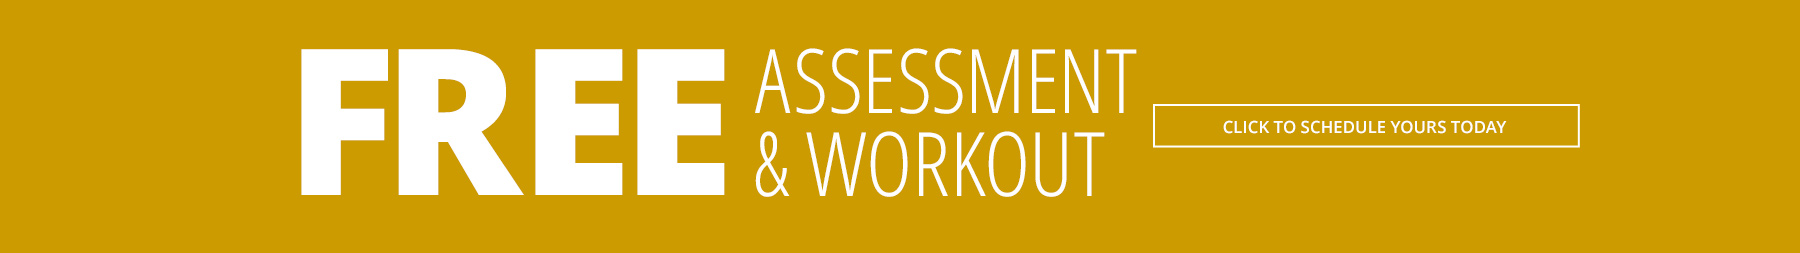 Free Assessment and Workout